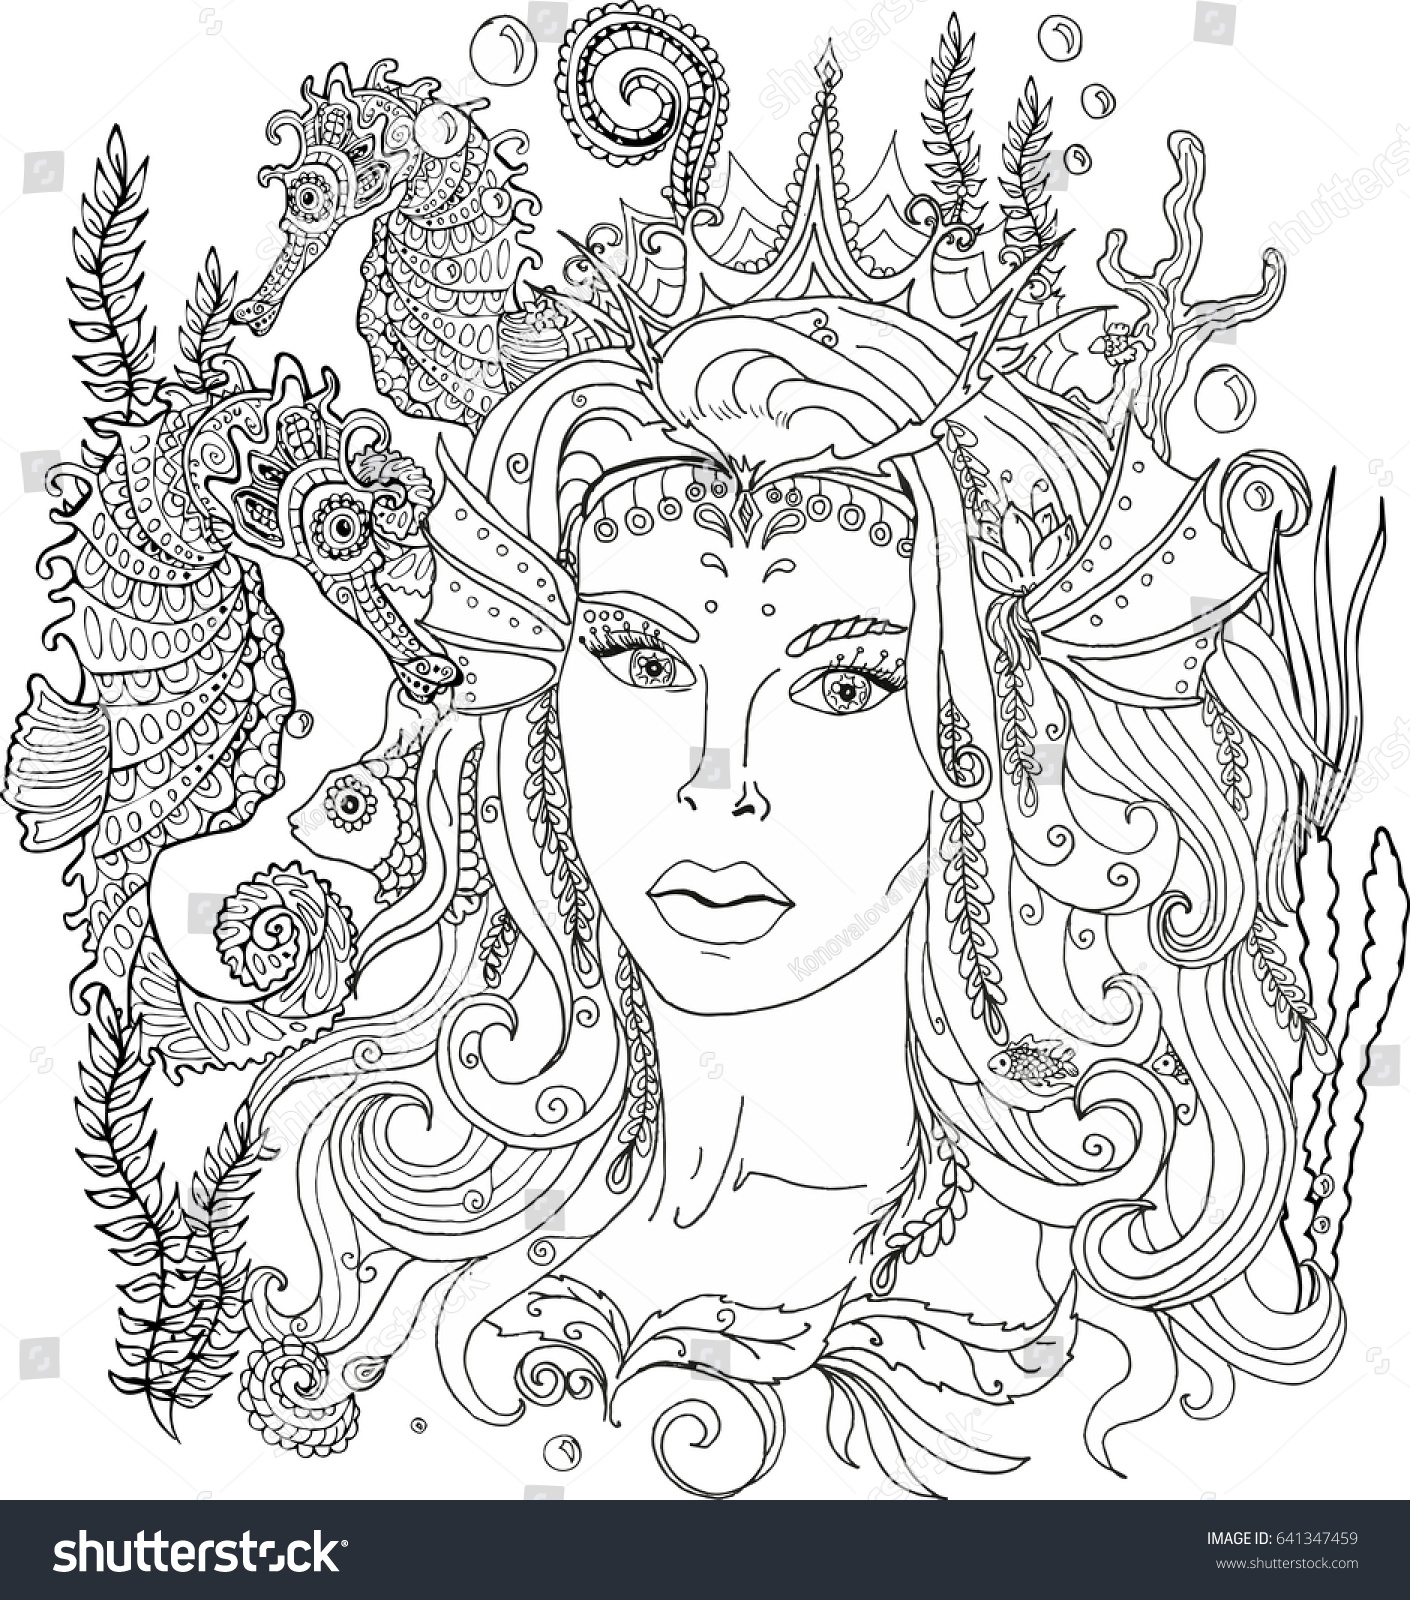 Vector Image Coloring Pages Adults Mermaid Stock 641347459 Underwater Queen